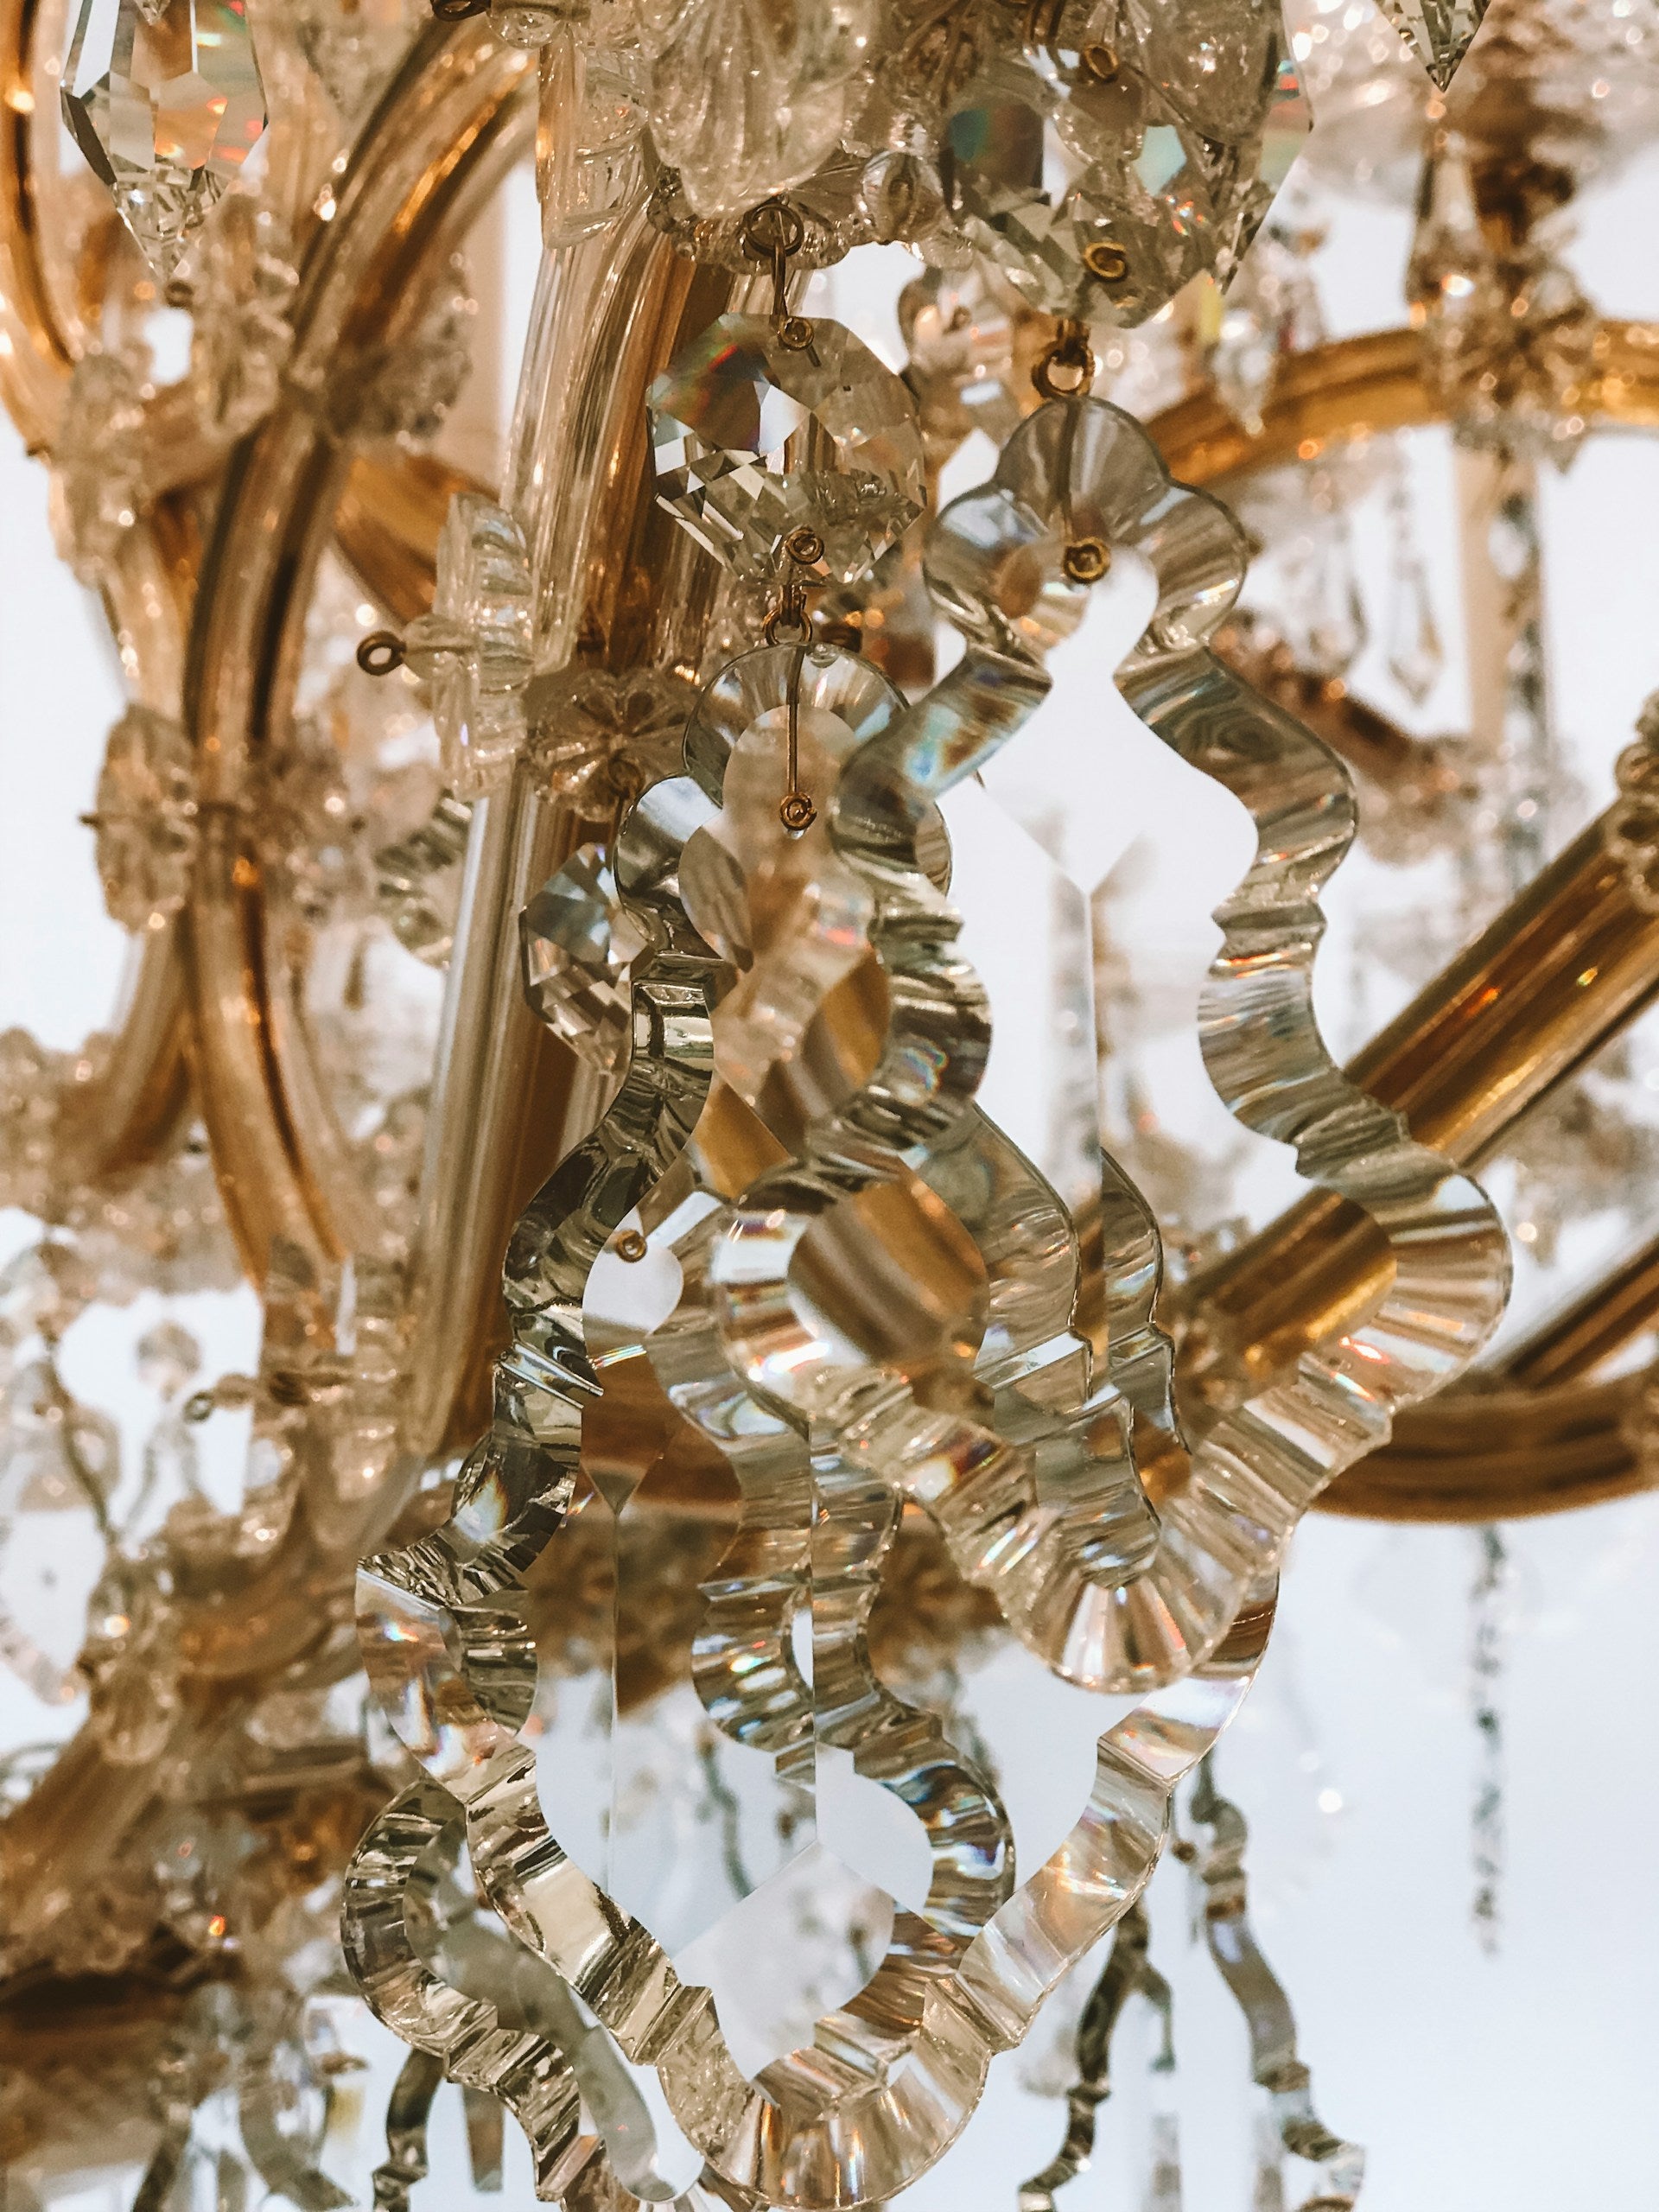 A gold and crystal light fixture.